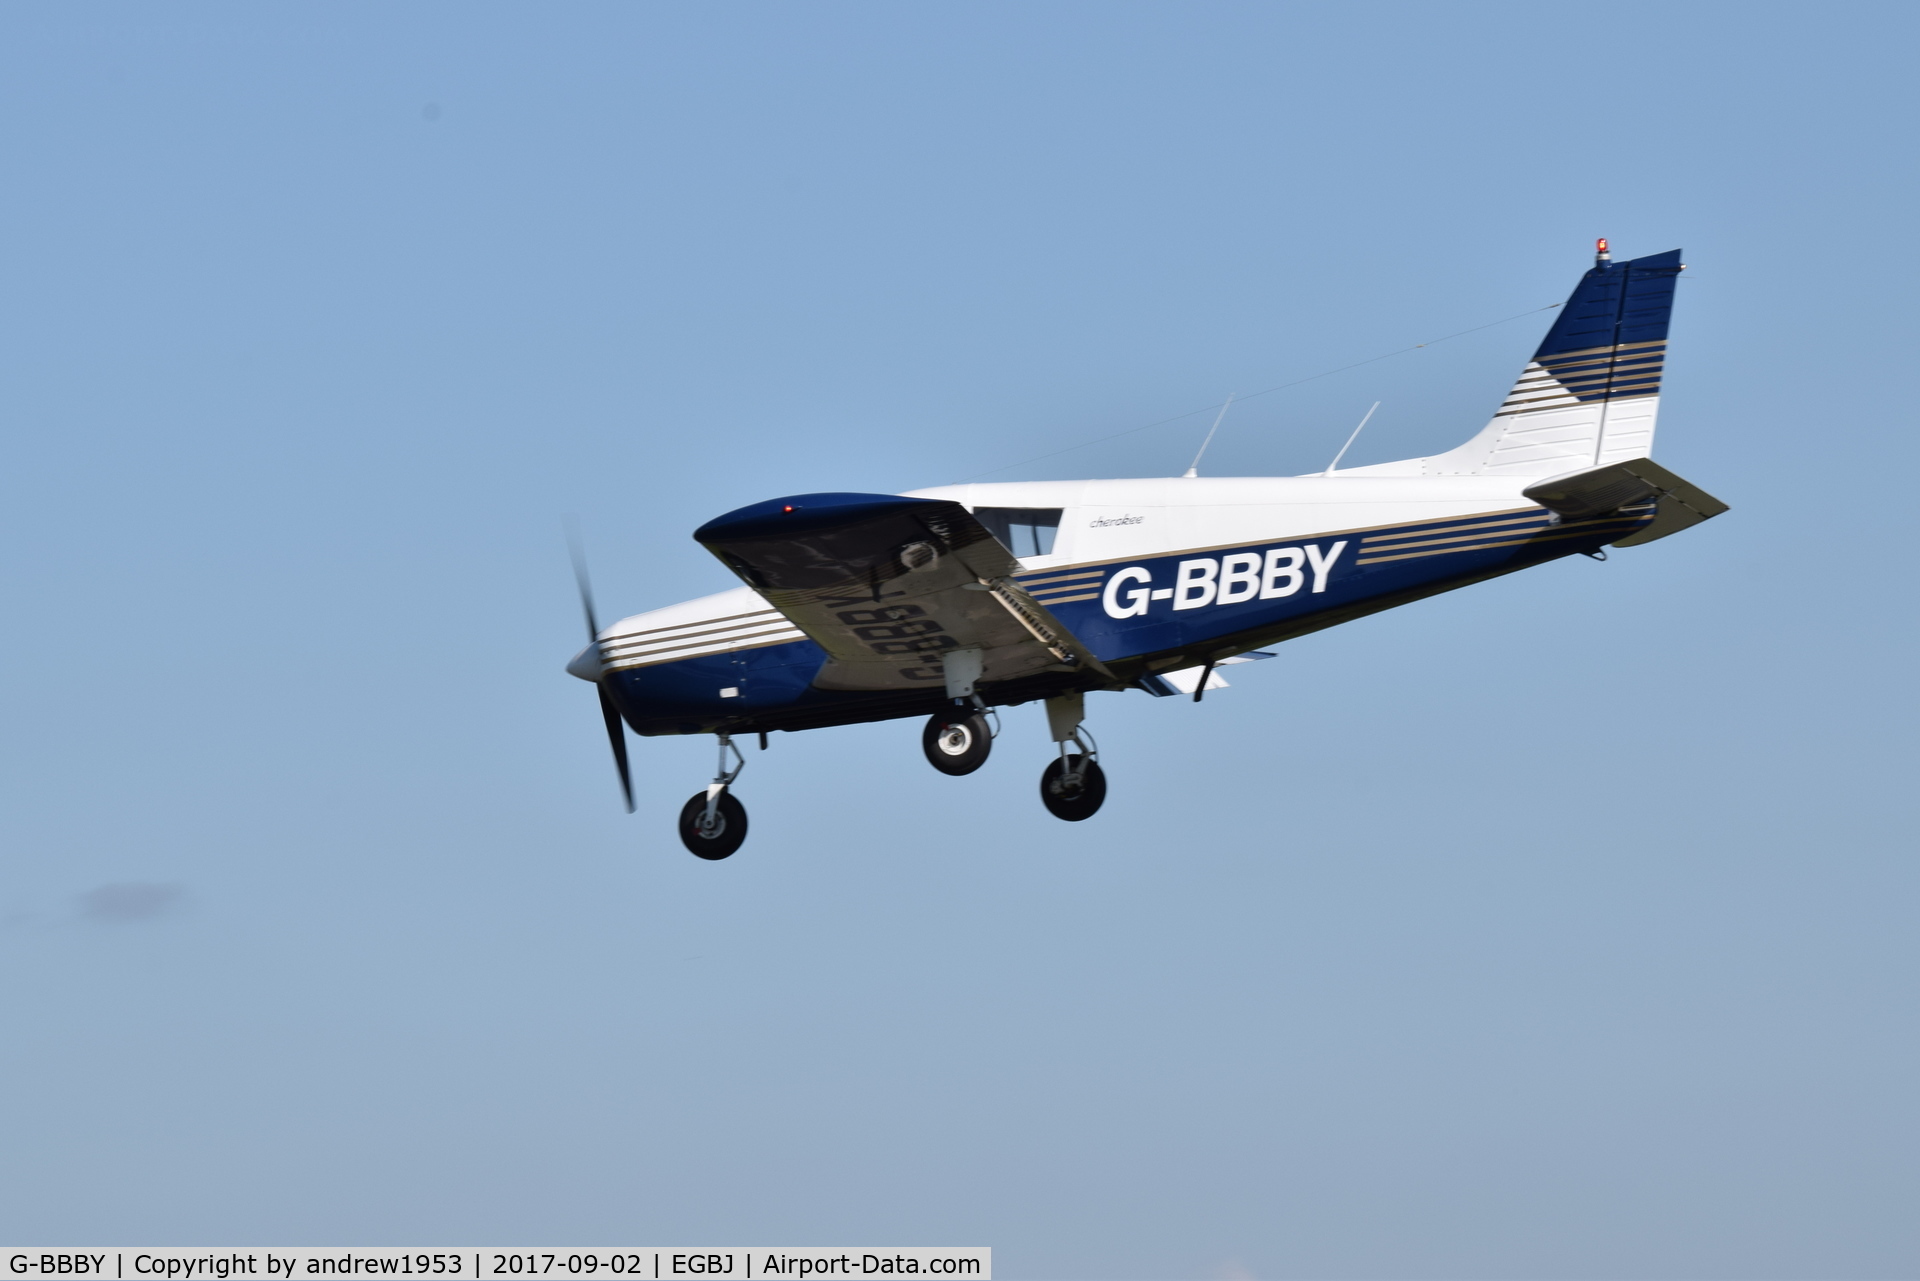 G-BBBY, 1973 Piper PA-28-140 Cherokee C/N 28-7325533, G-BBBY at Gloucestershire Airport.